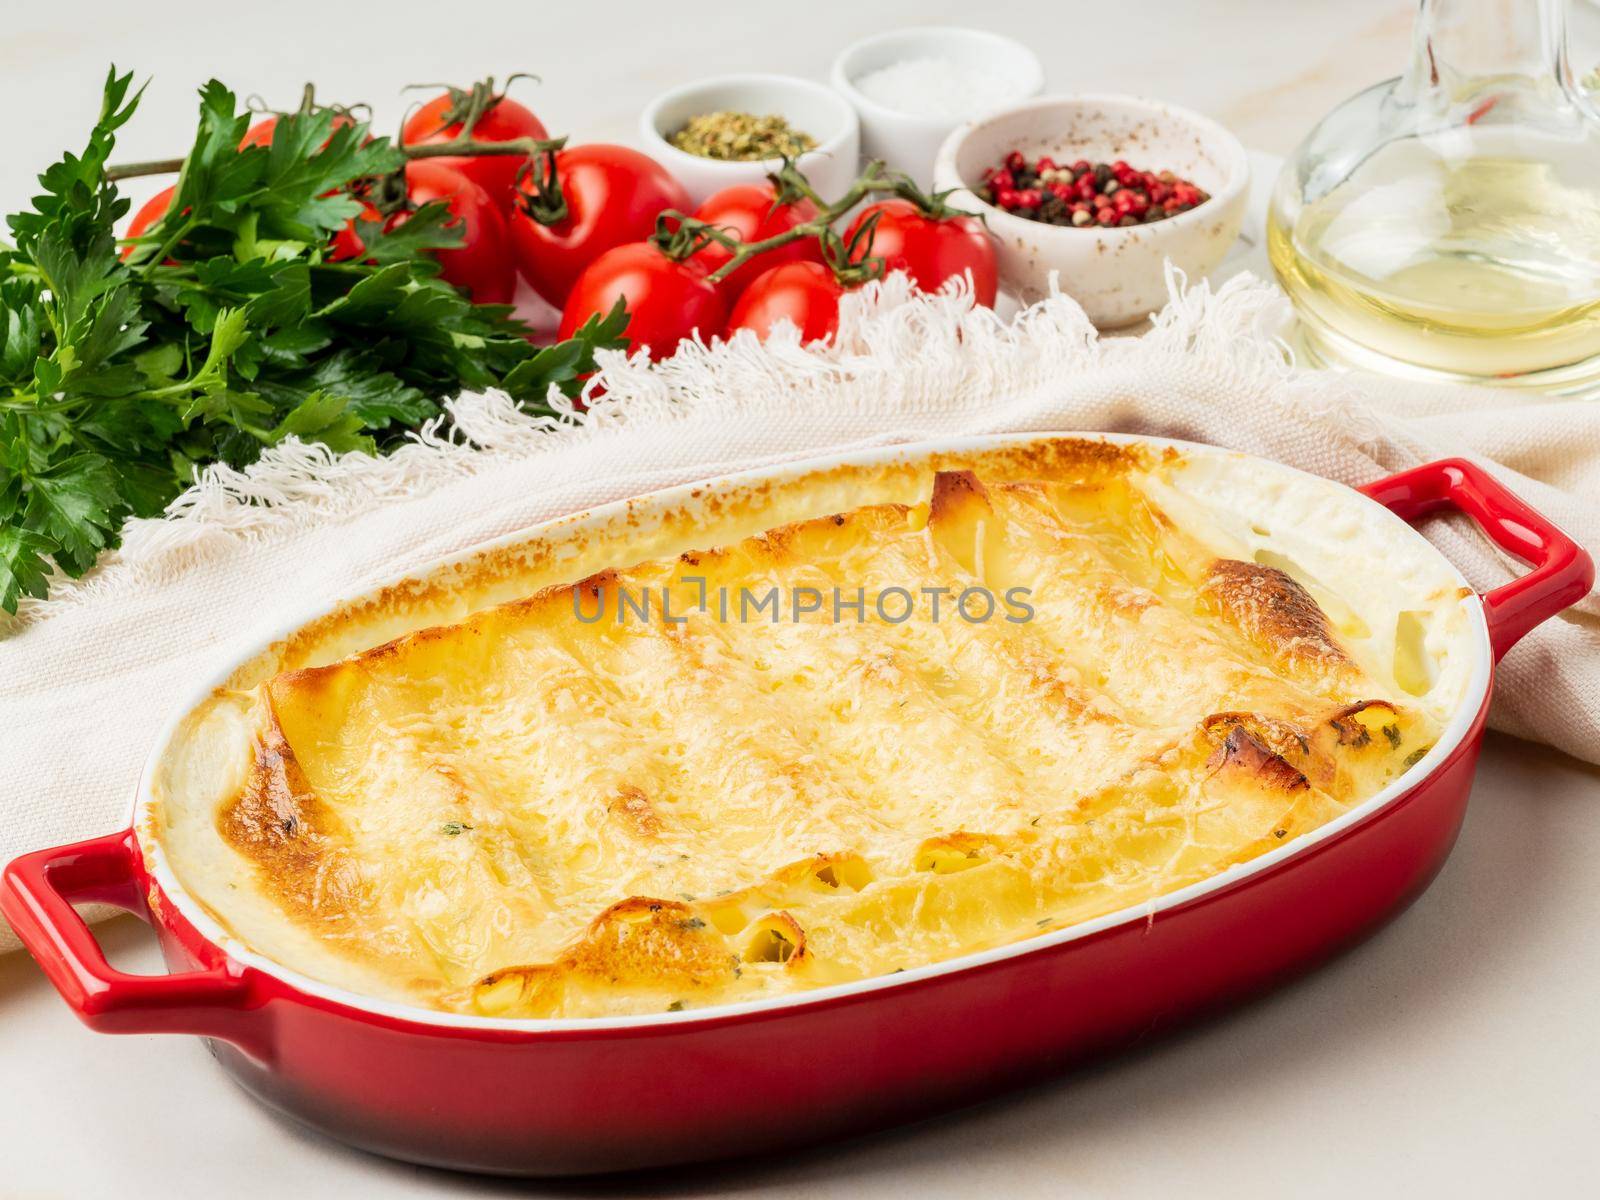 Cannelloni with filling of ricotta and parsley, baked with béchamel sauce, side view, white marble background